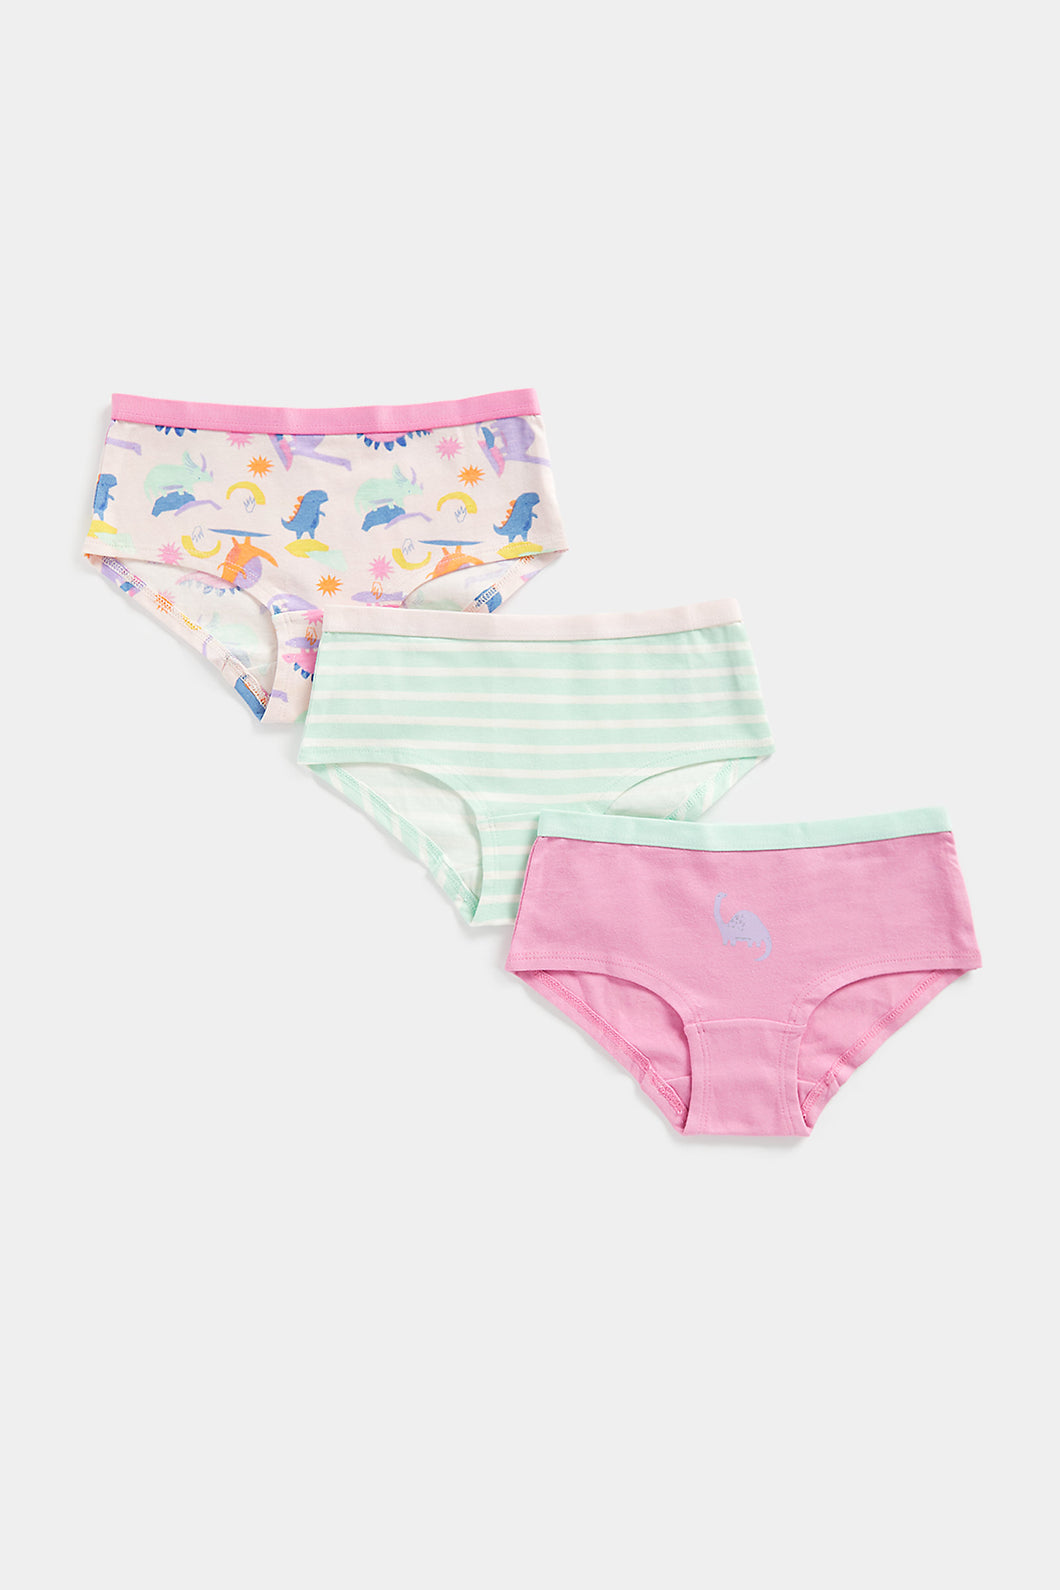 Mothercare Dino Hipster Briefs - 3 Pack